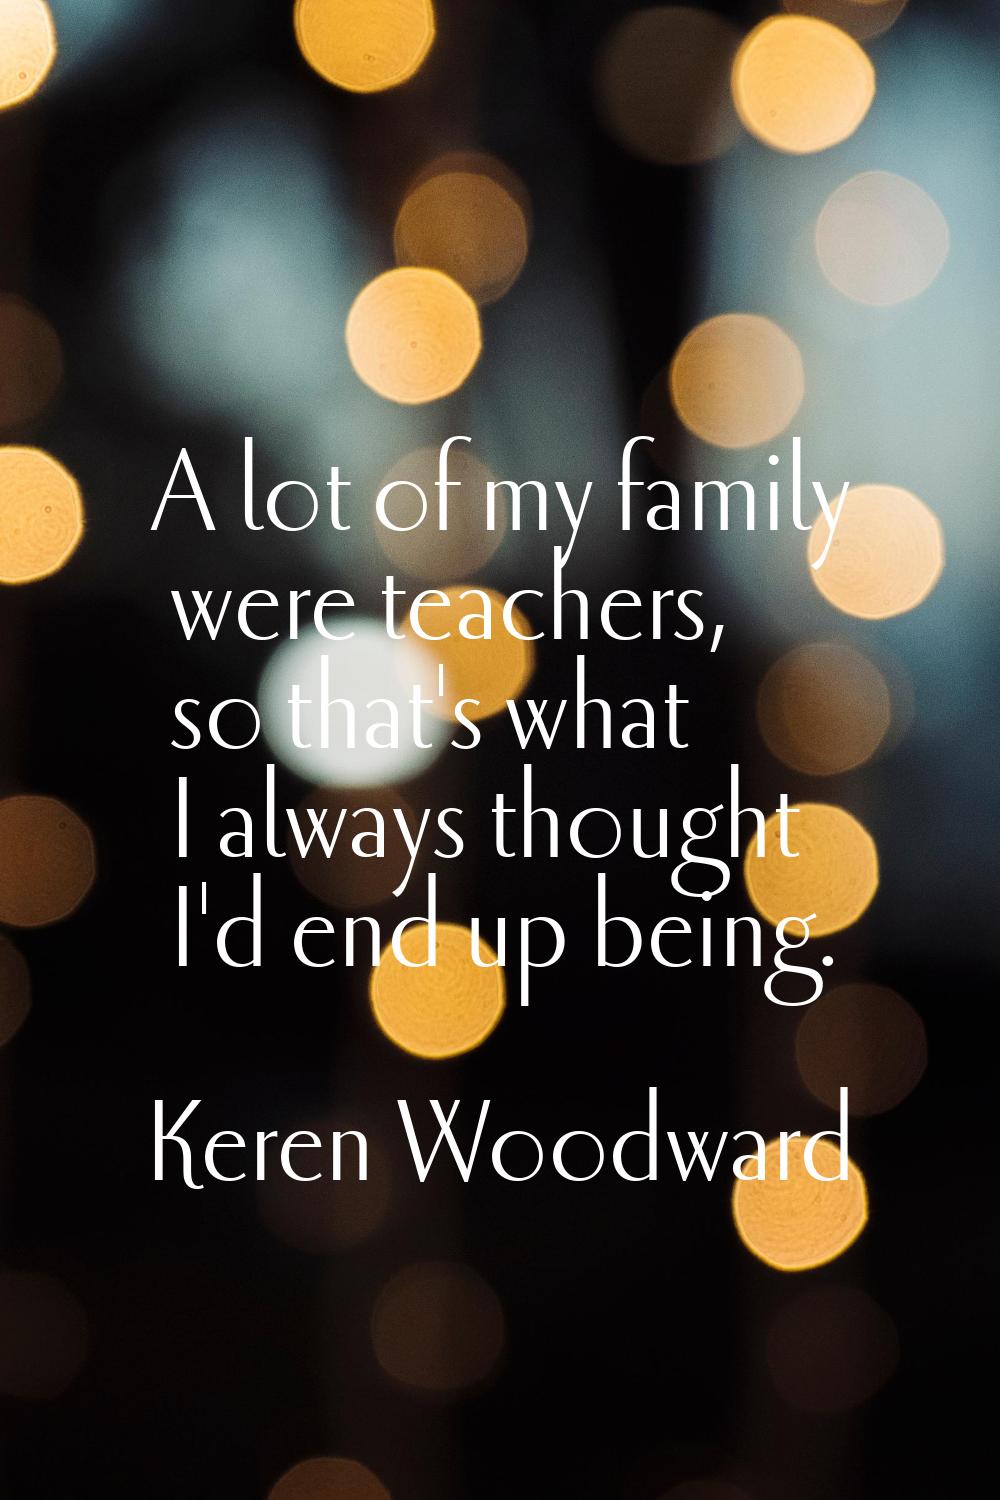 A lot of my family were teachers, so that's what I always thought I'd end up being.